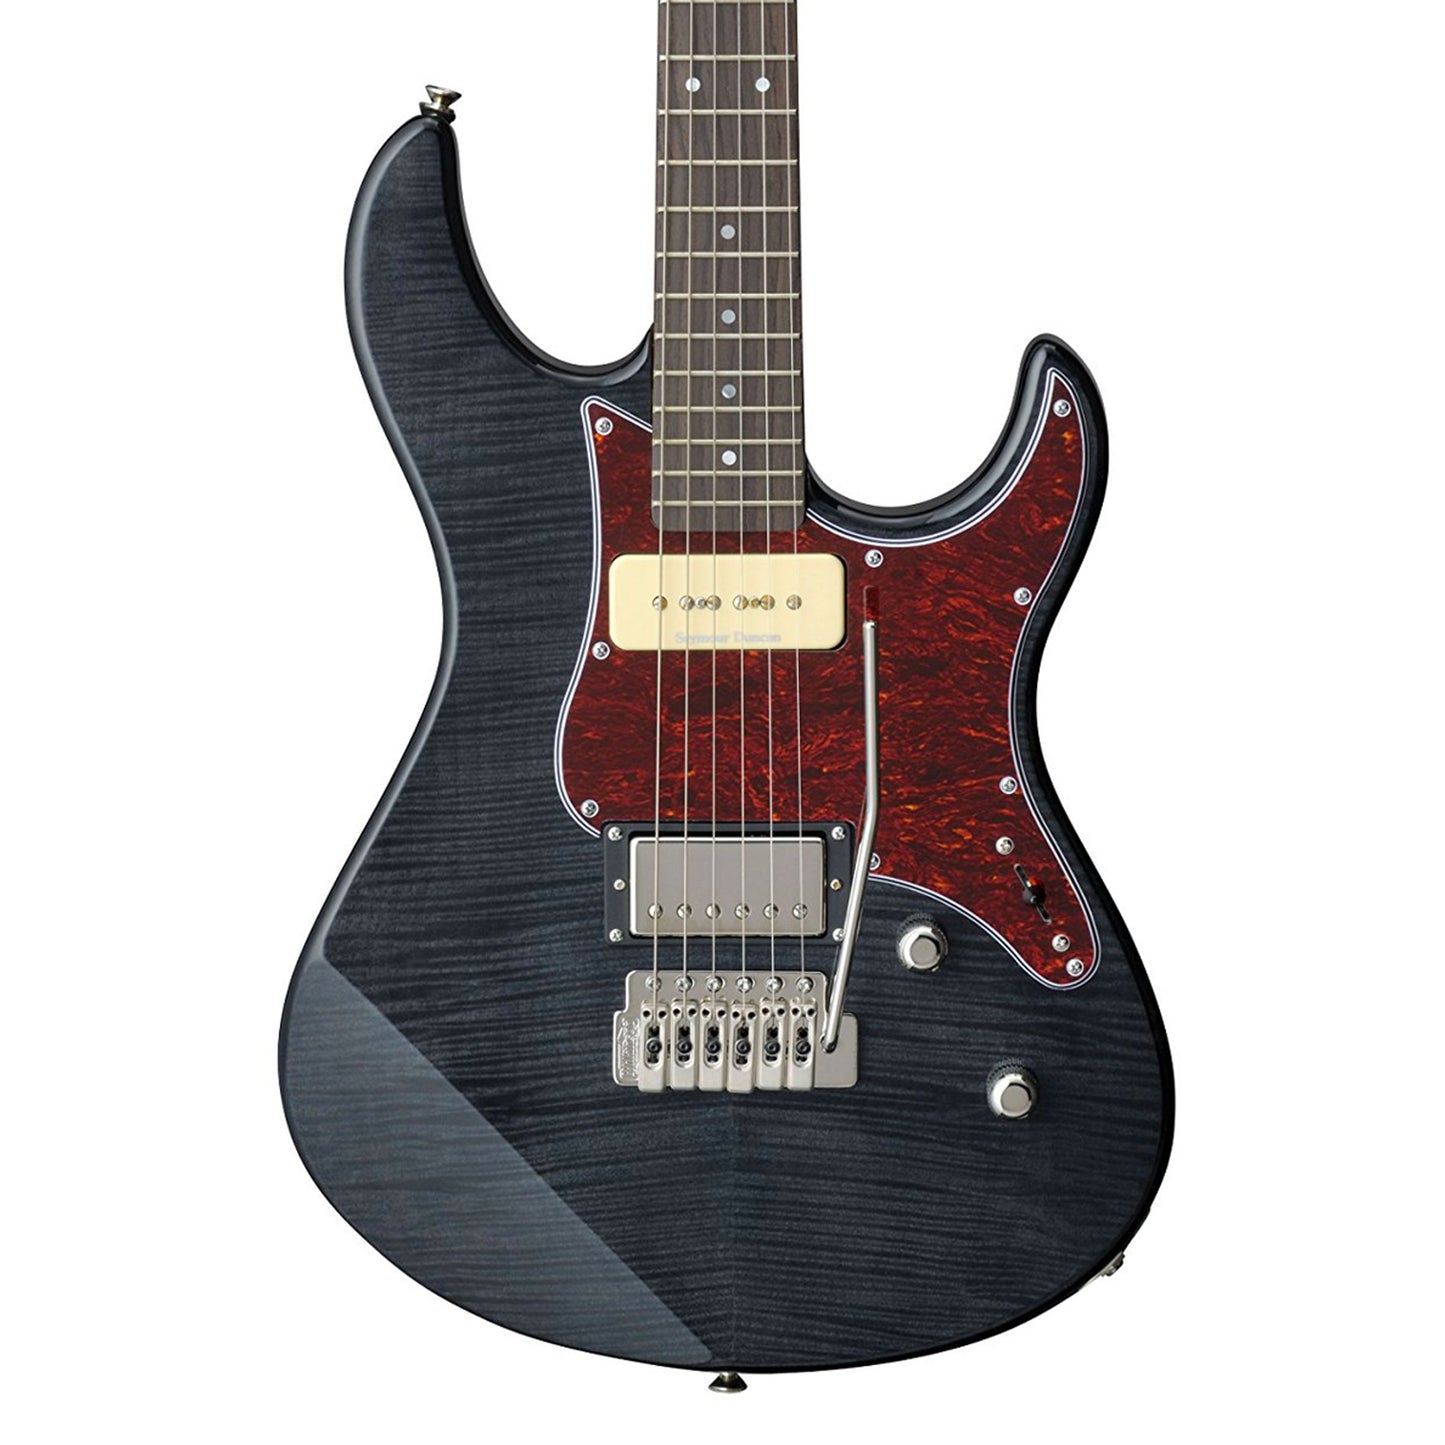 Yamaha PAC611VFM Pacifica Electric Guitar in Trans Black